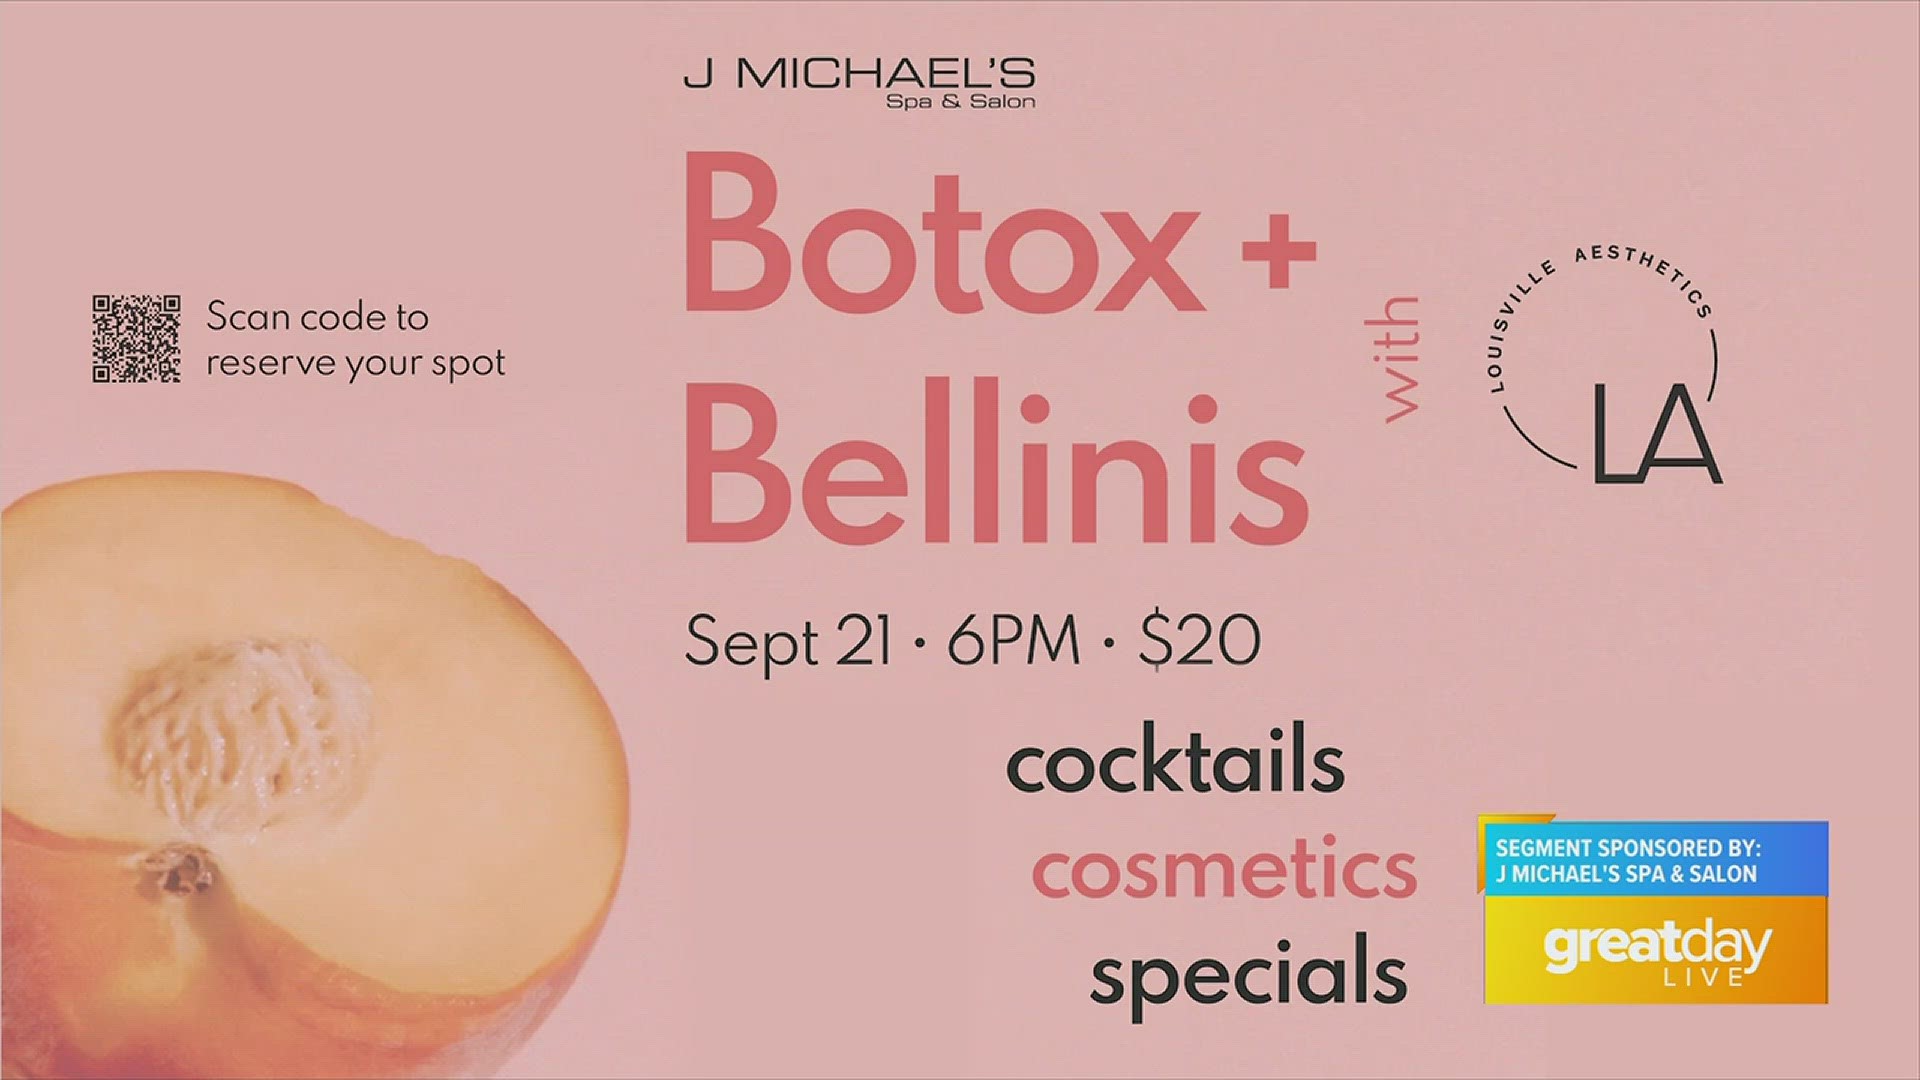 J Michael's Spa and Salon is planning a Botox and Bellini event Thursday, September 21st.